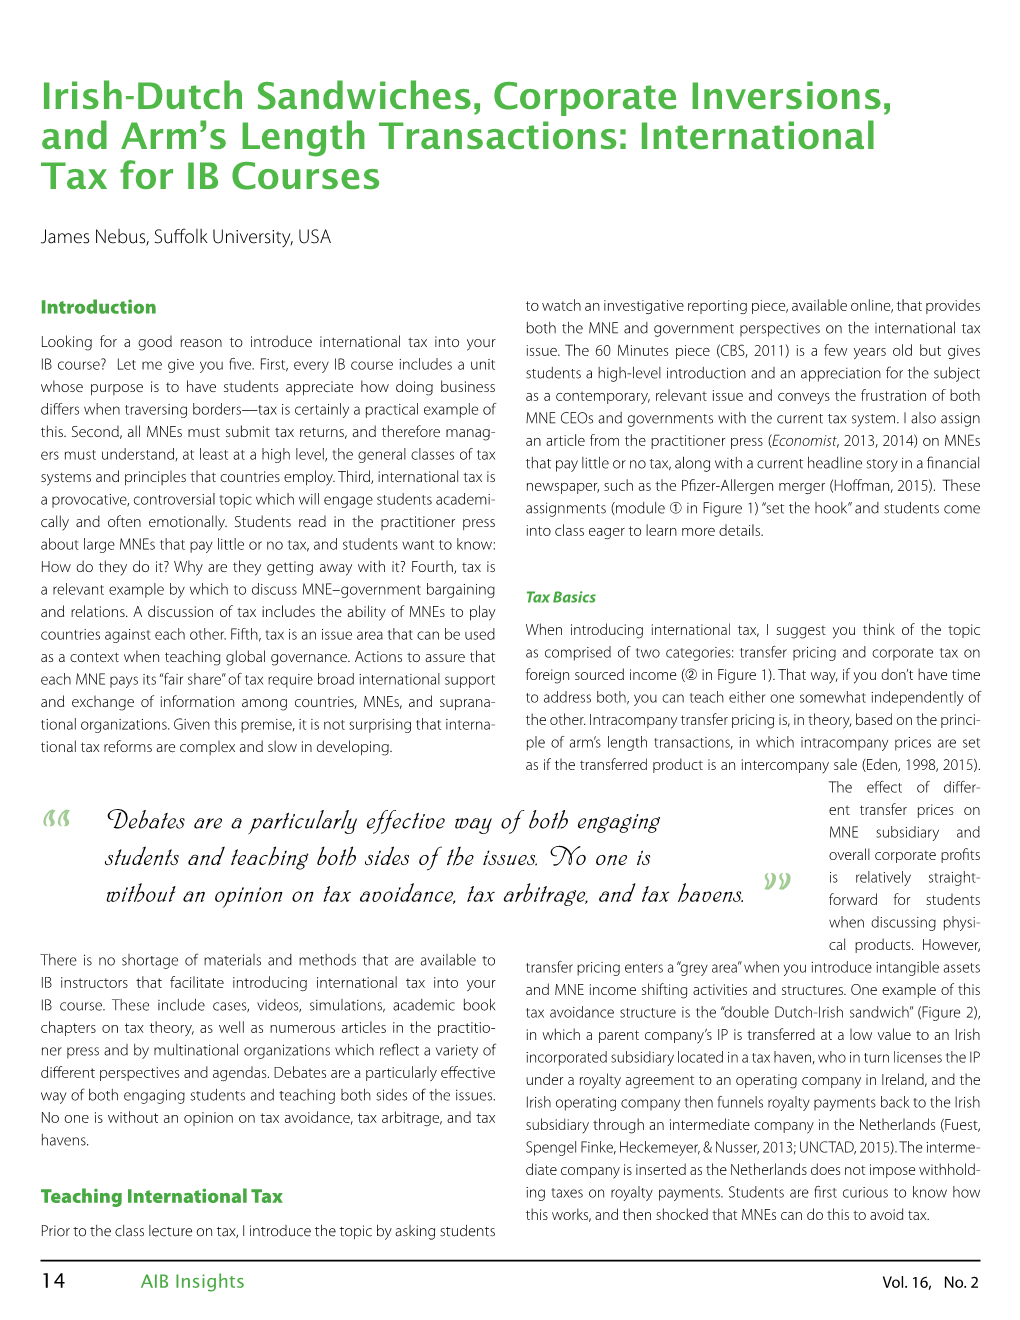 Irish-Dutch Sandwiches, Corporate Inversions, and Arm’S Length Transactions: International Tax for IB Courses